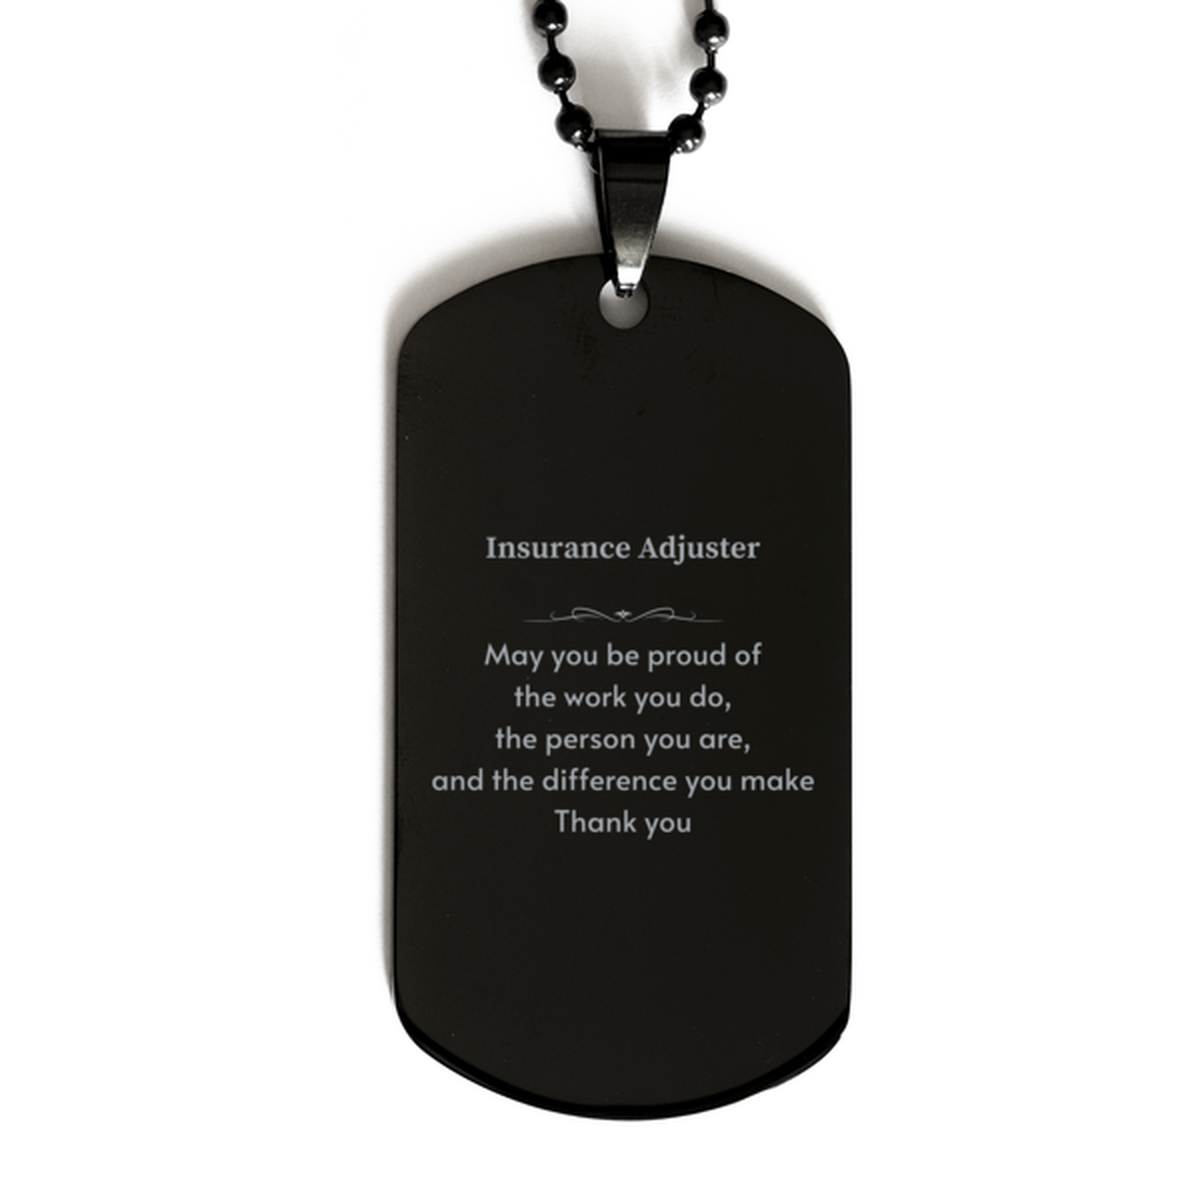 Heartwarming Black Dog Tag Retirement Coworkers Gifts for Insurance Adjuster, Insurance Adjuster May You be proud of the work you do, the person you are Gifts for Boss Men Women Friends